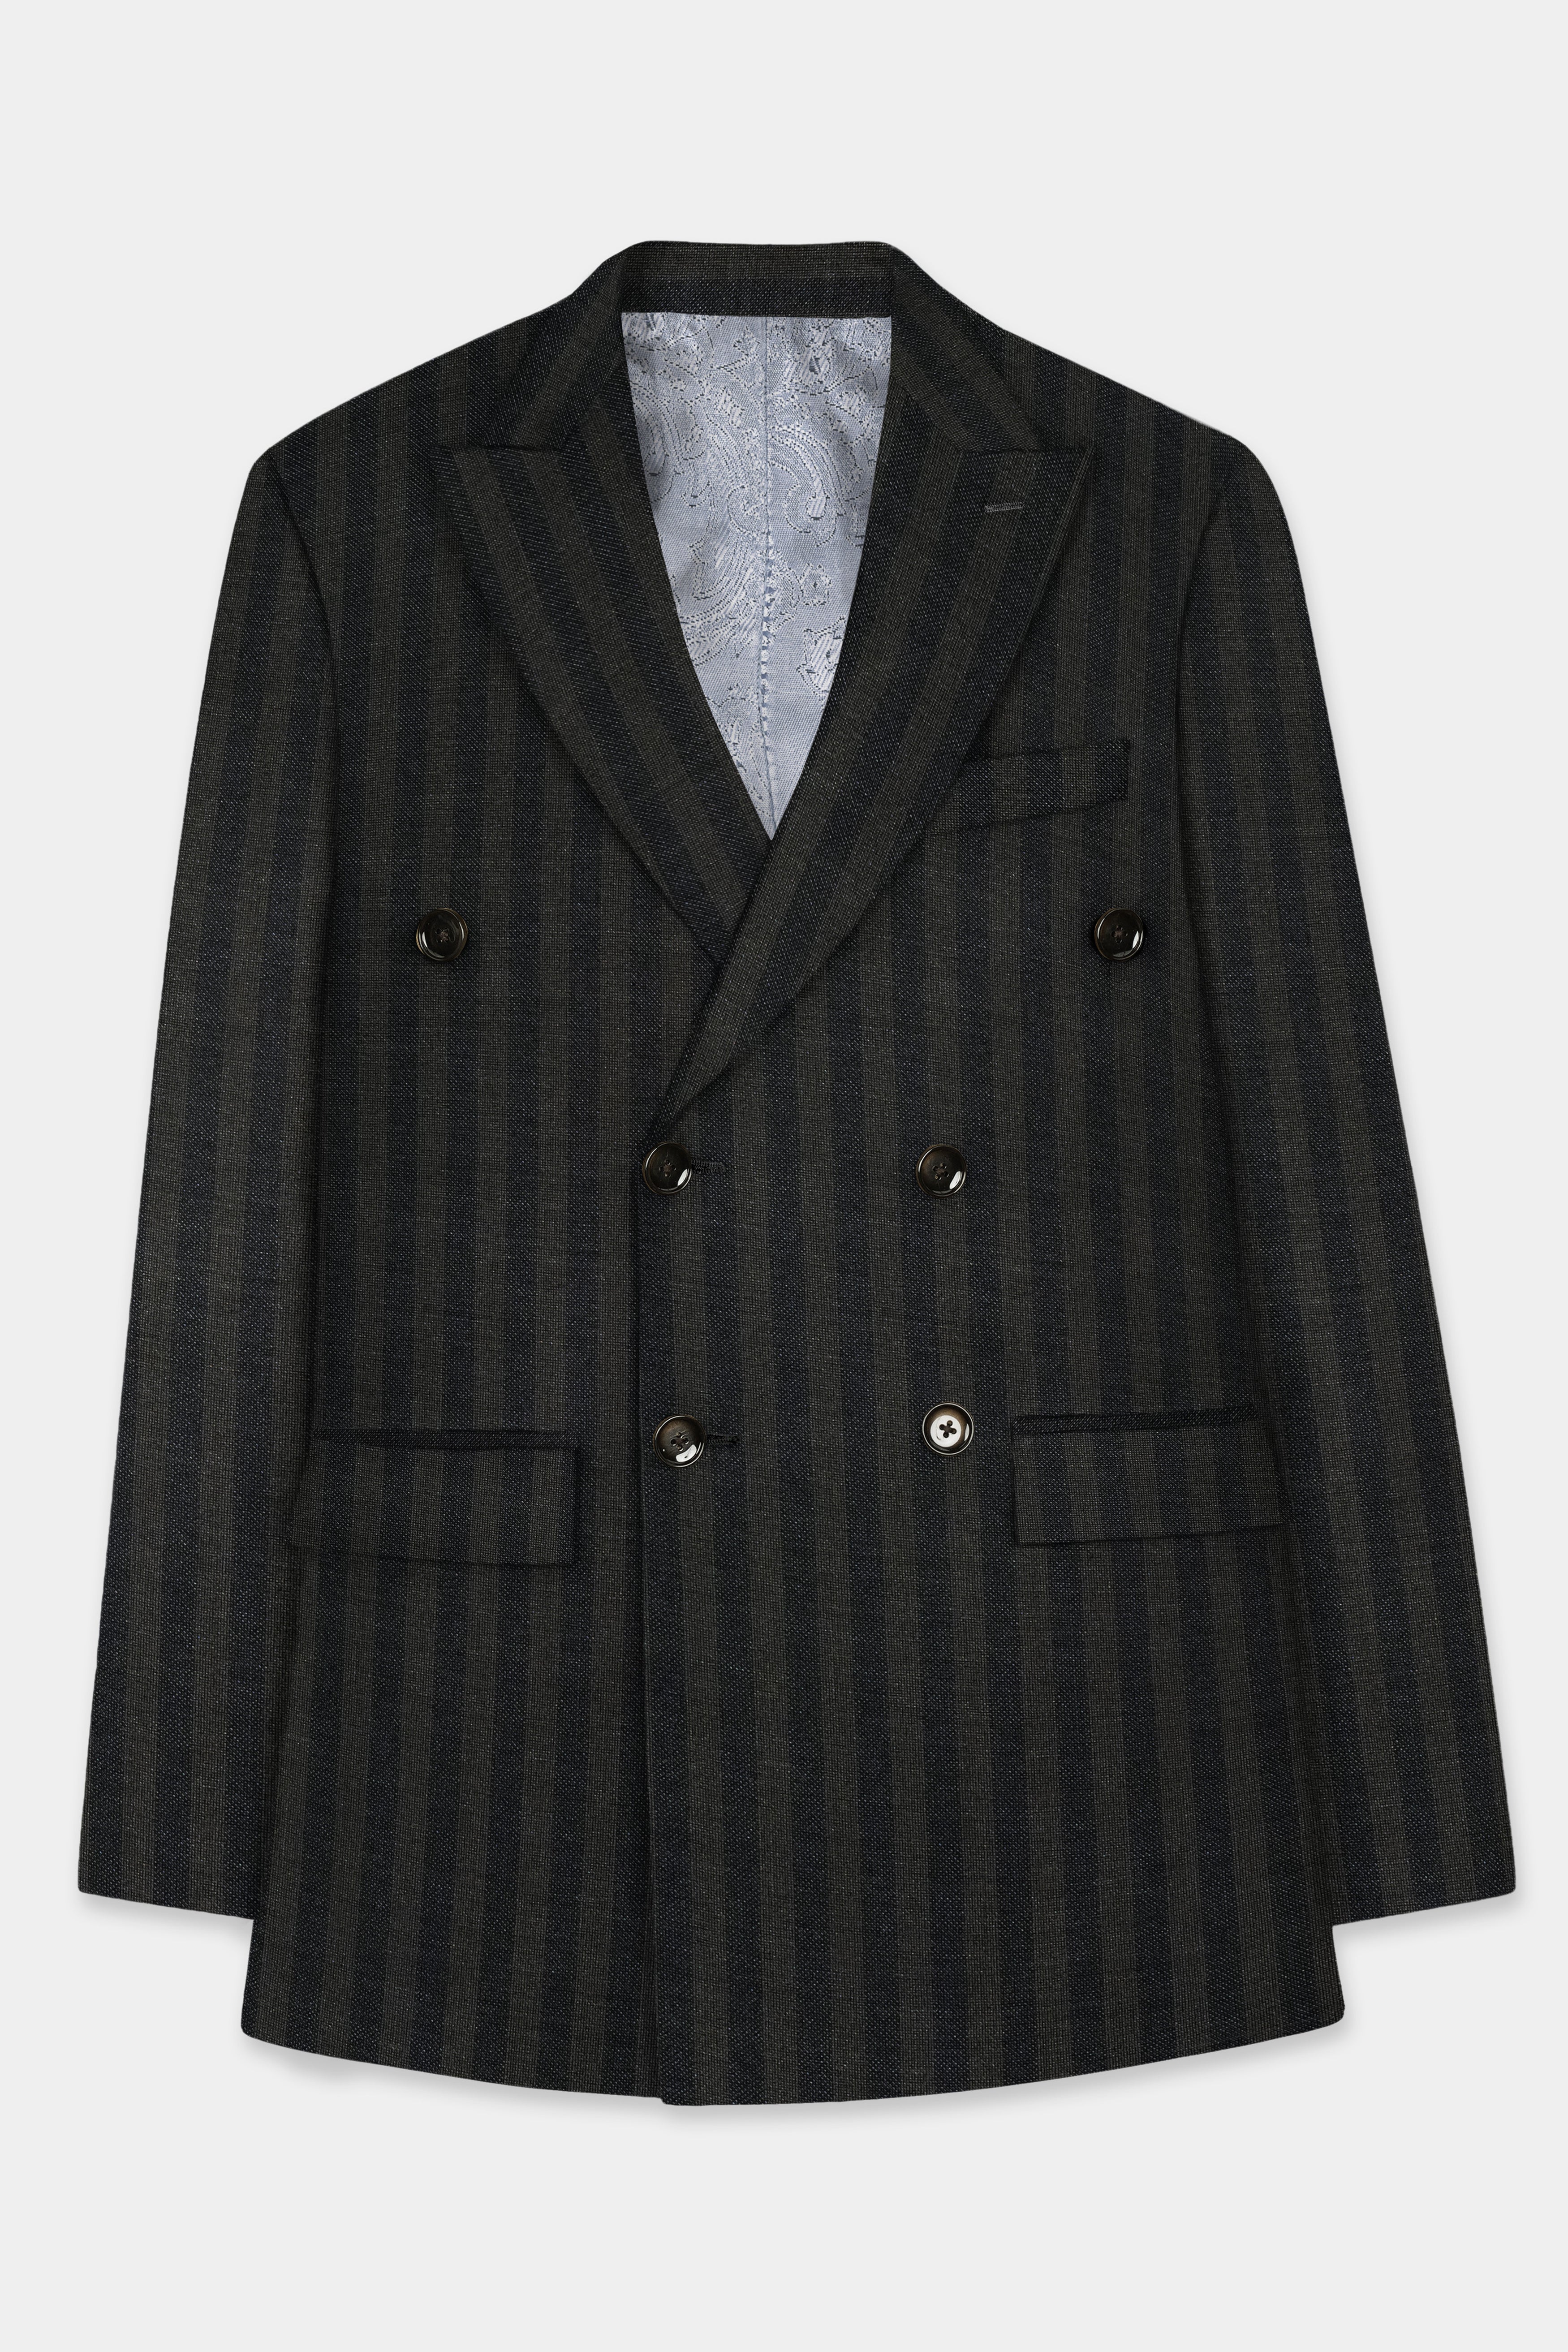 Heavy Green with Black Striped Wool Blend Double Breasted Suit